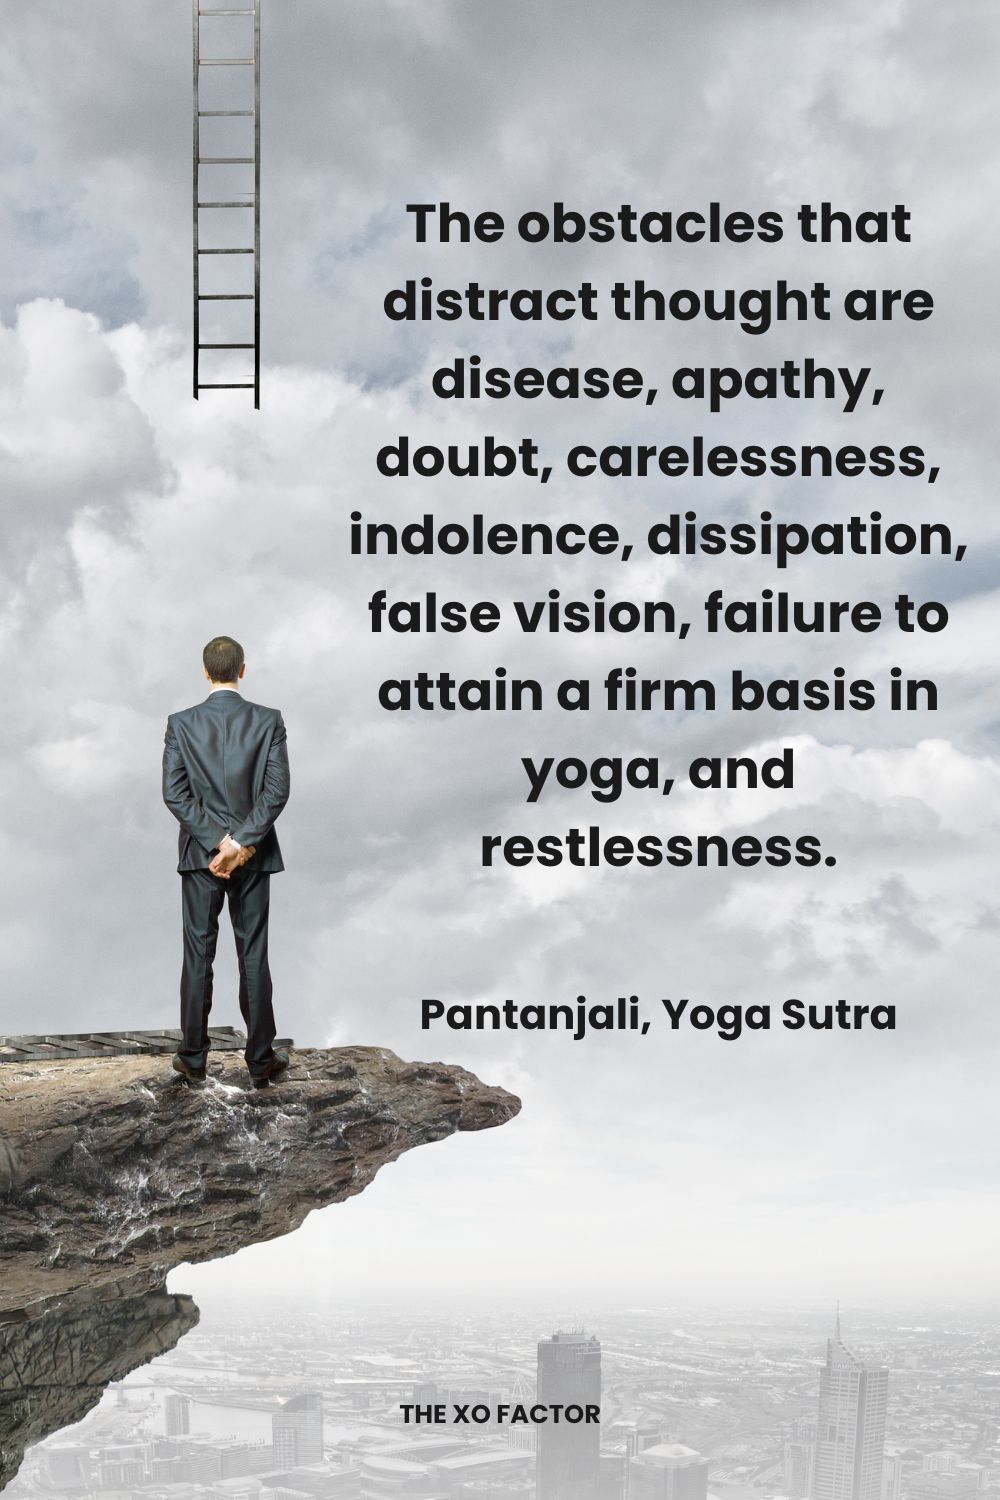 The obstacles that distract thought are disease, apathy, doubt, carelessness, indolence, dissipation, false vision, failure to attain a firm basis in yoga, and restlessness. Pantanjali, Yoga Sutra